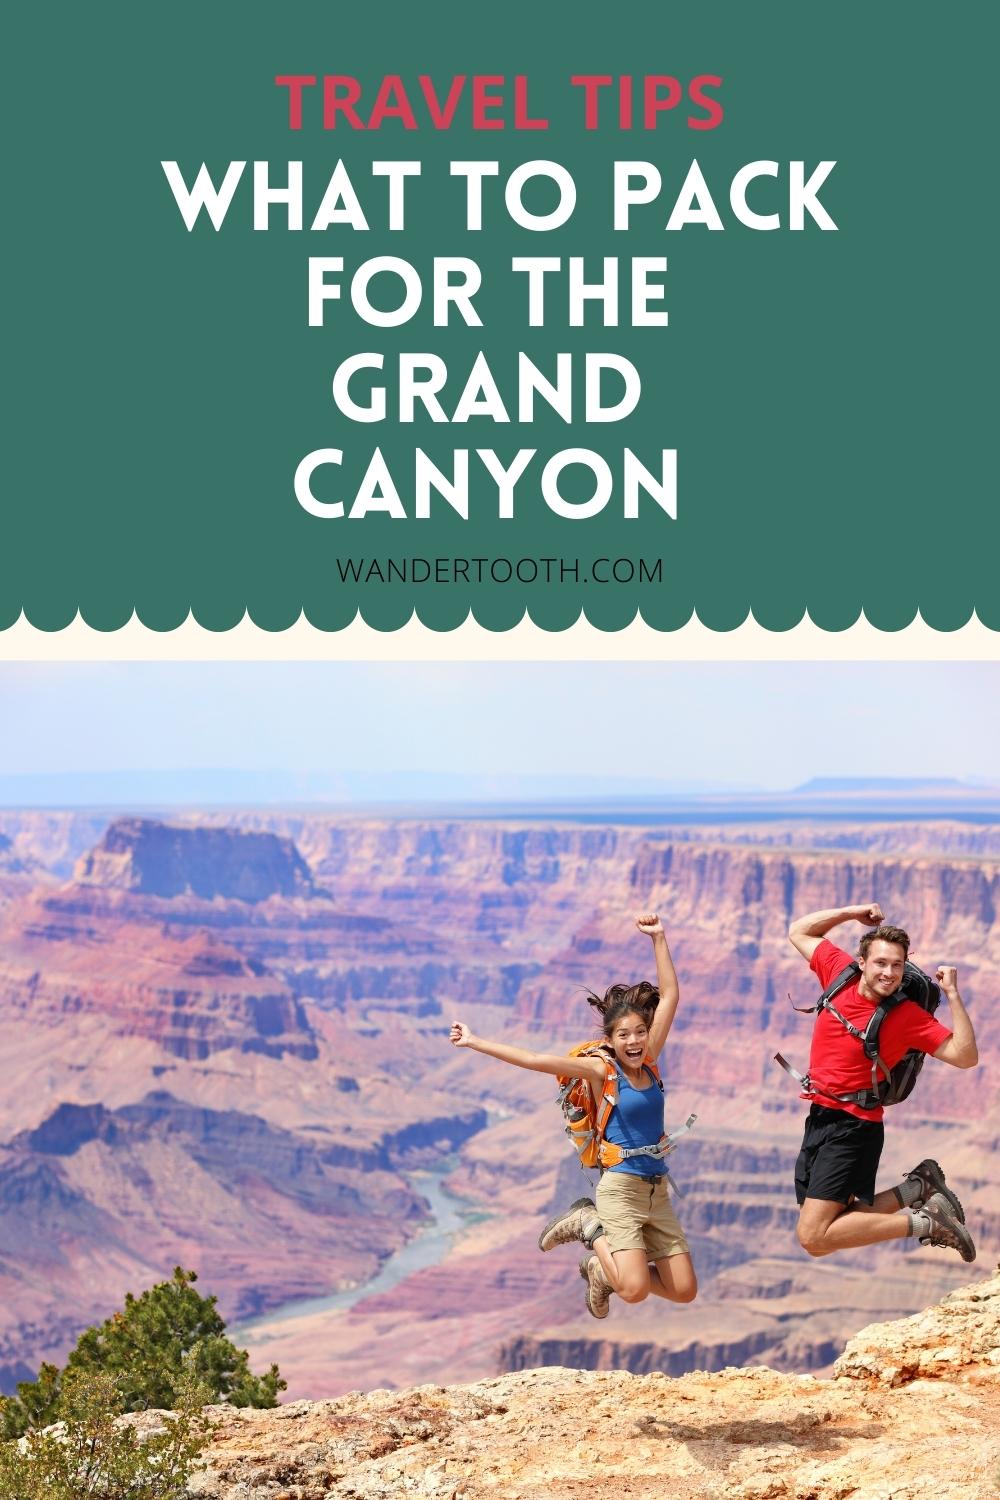 What to Pack for the Grand Canyon - Wandertooth Travel